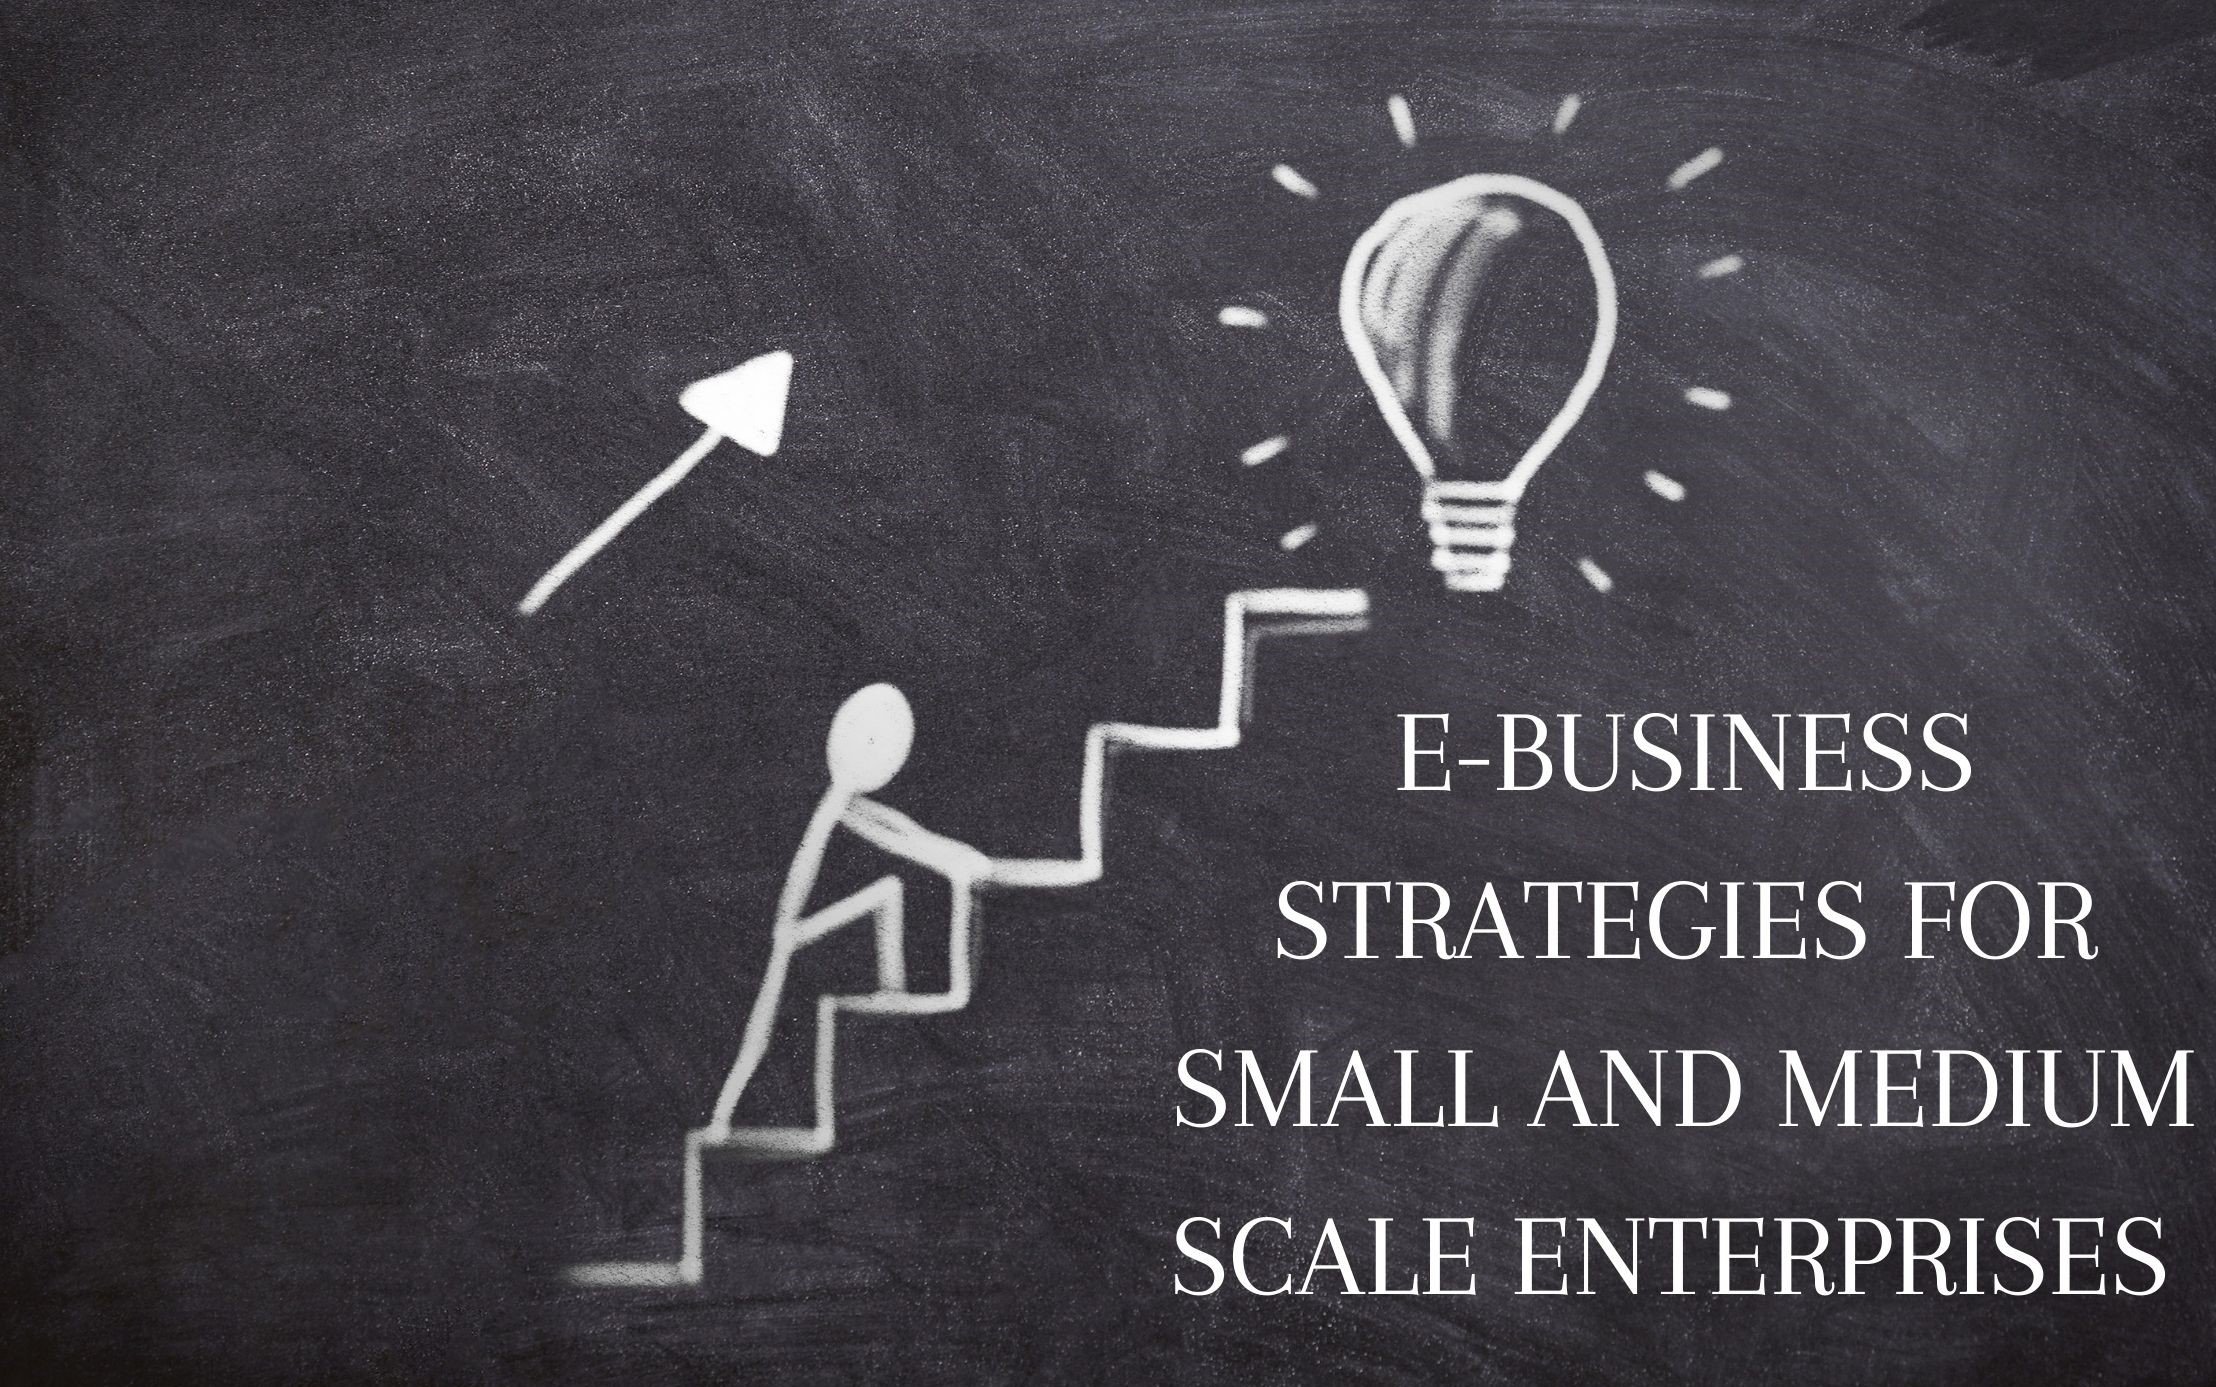 E-BUSINESS STRATEGIES FOR SMALL AND MEDIUM SCALE ENTERPRISES   